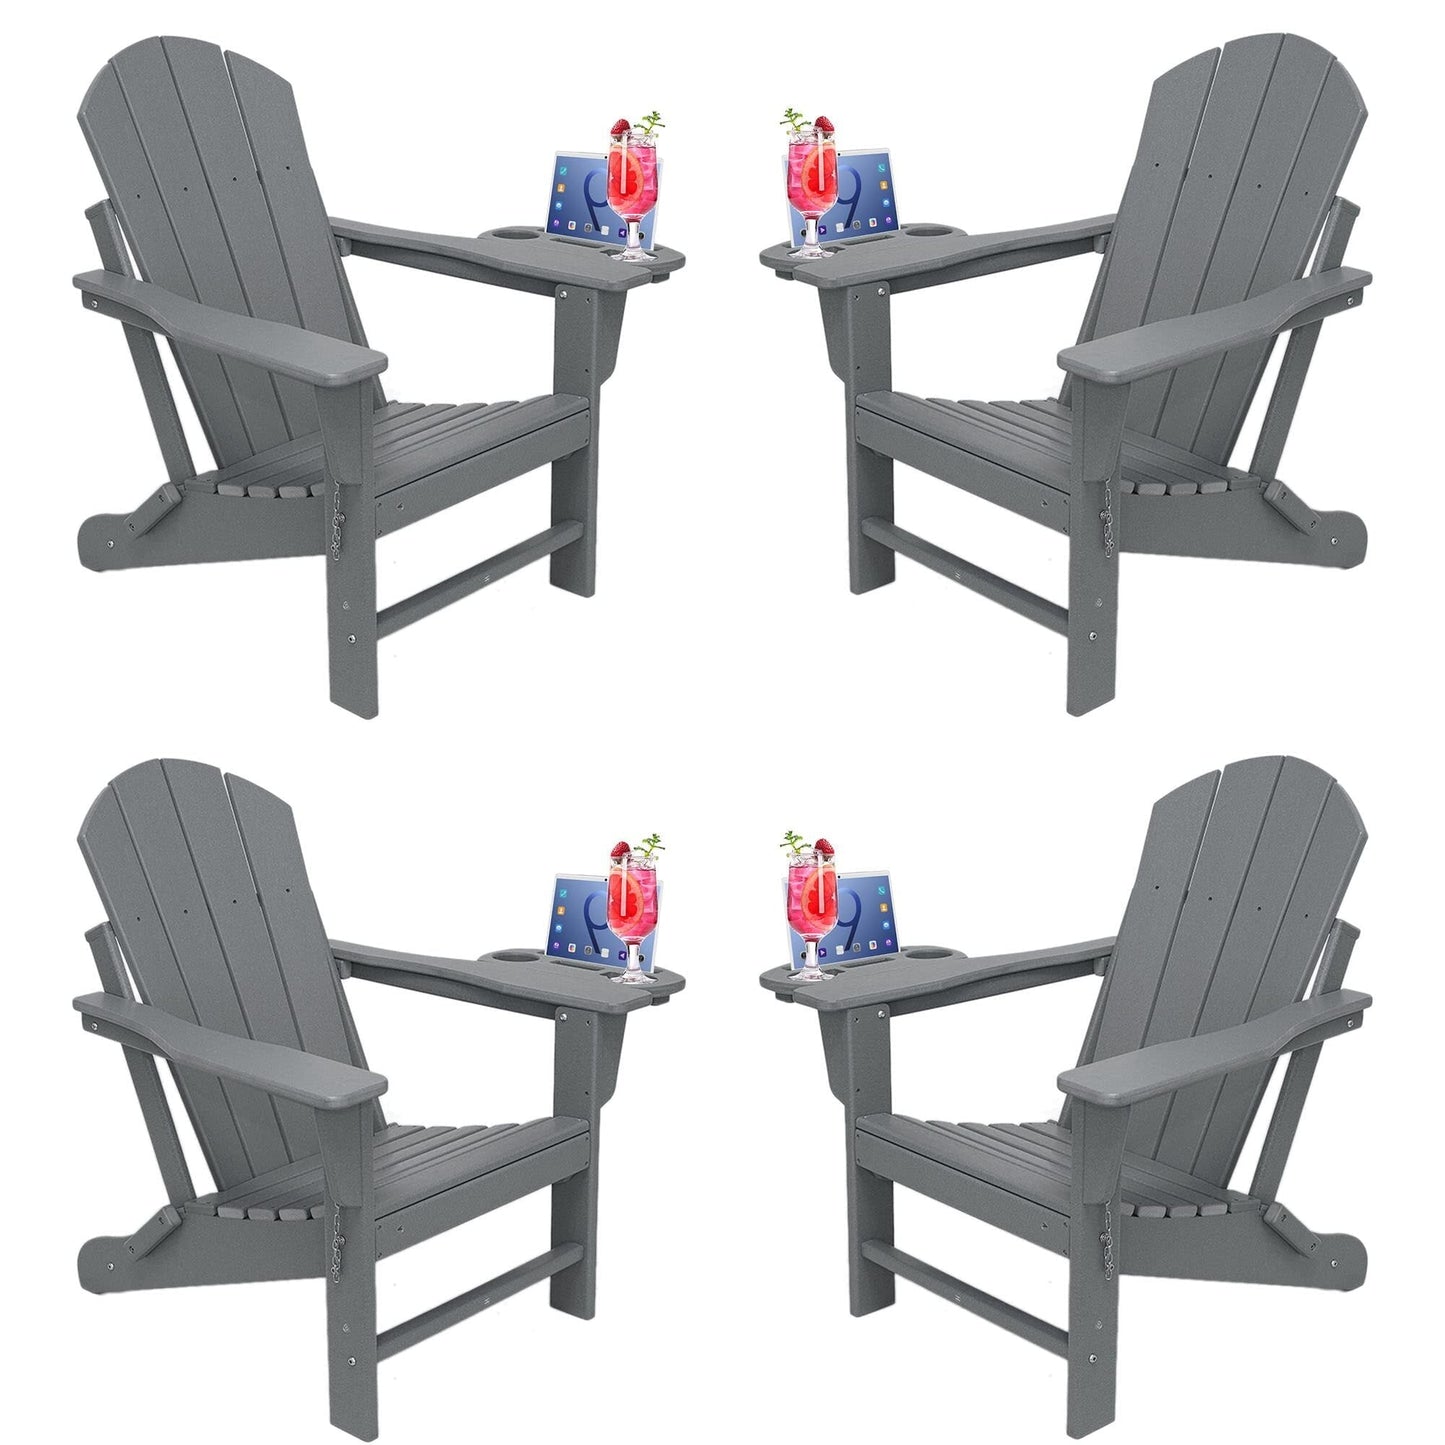 (Set of 4) Folding Plastic Adirondack Chair with 4 in 1 Cup Holder Plastic Adirondack Chairs Weather Resistant.Fire Pit Chair for Deck. Garden. Backyard